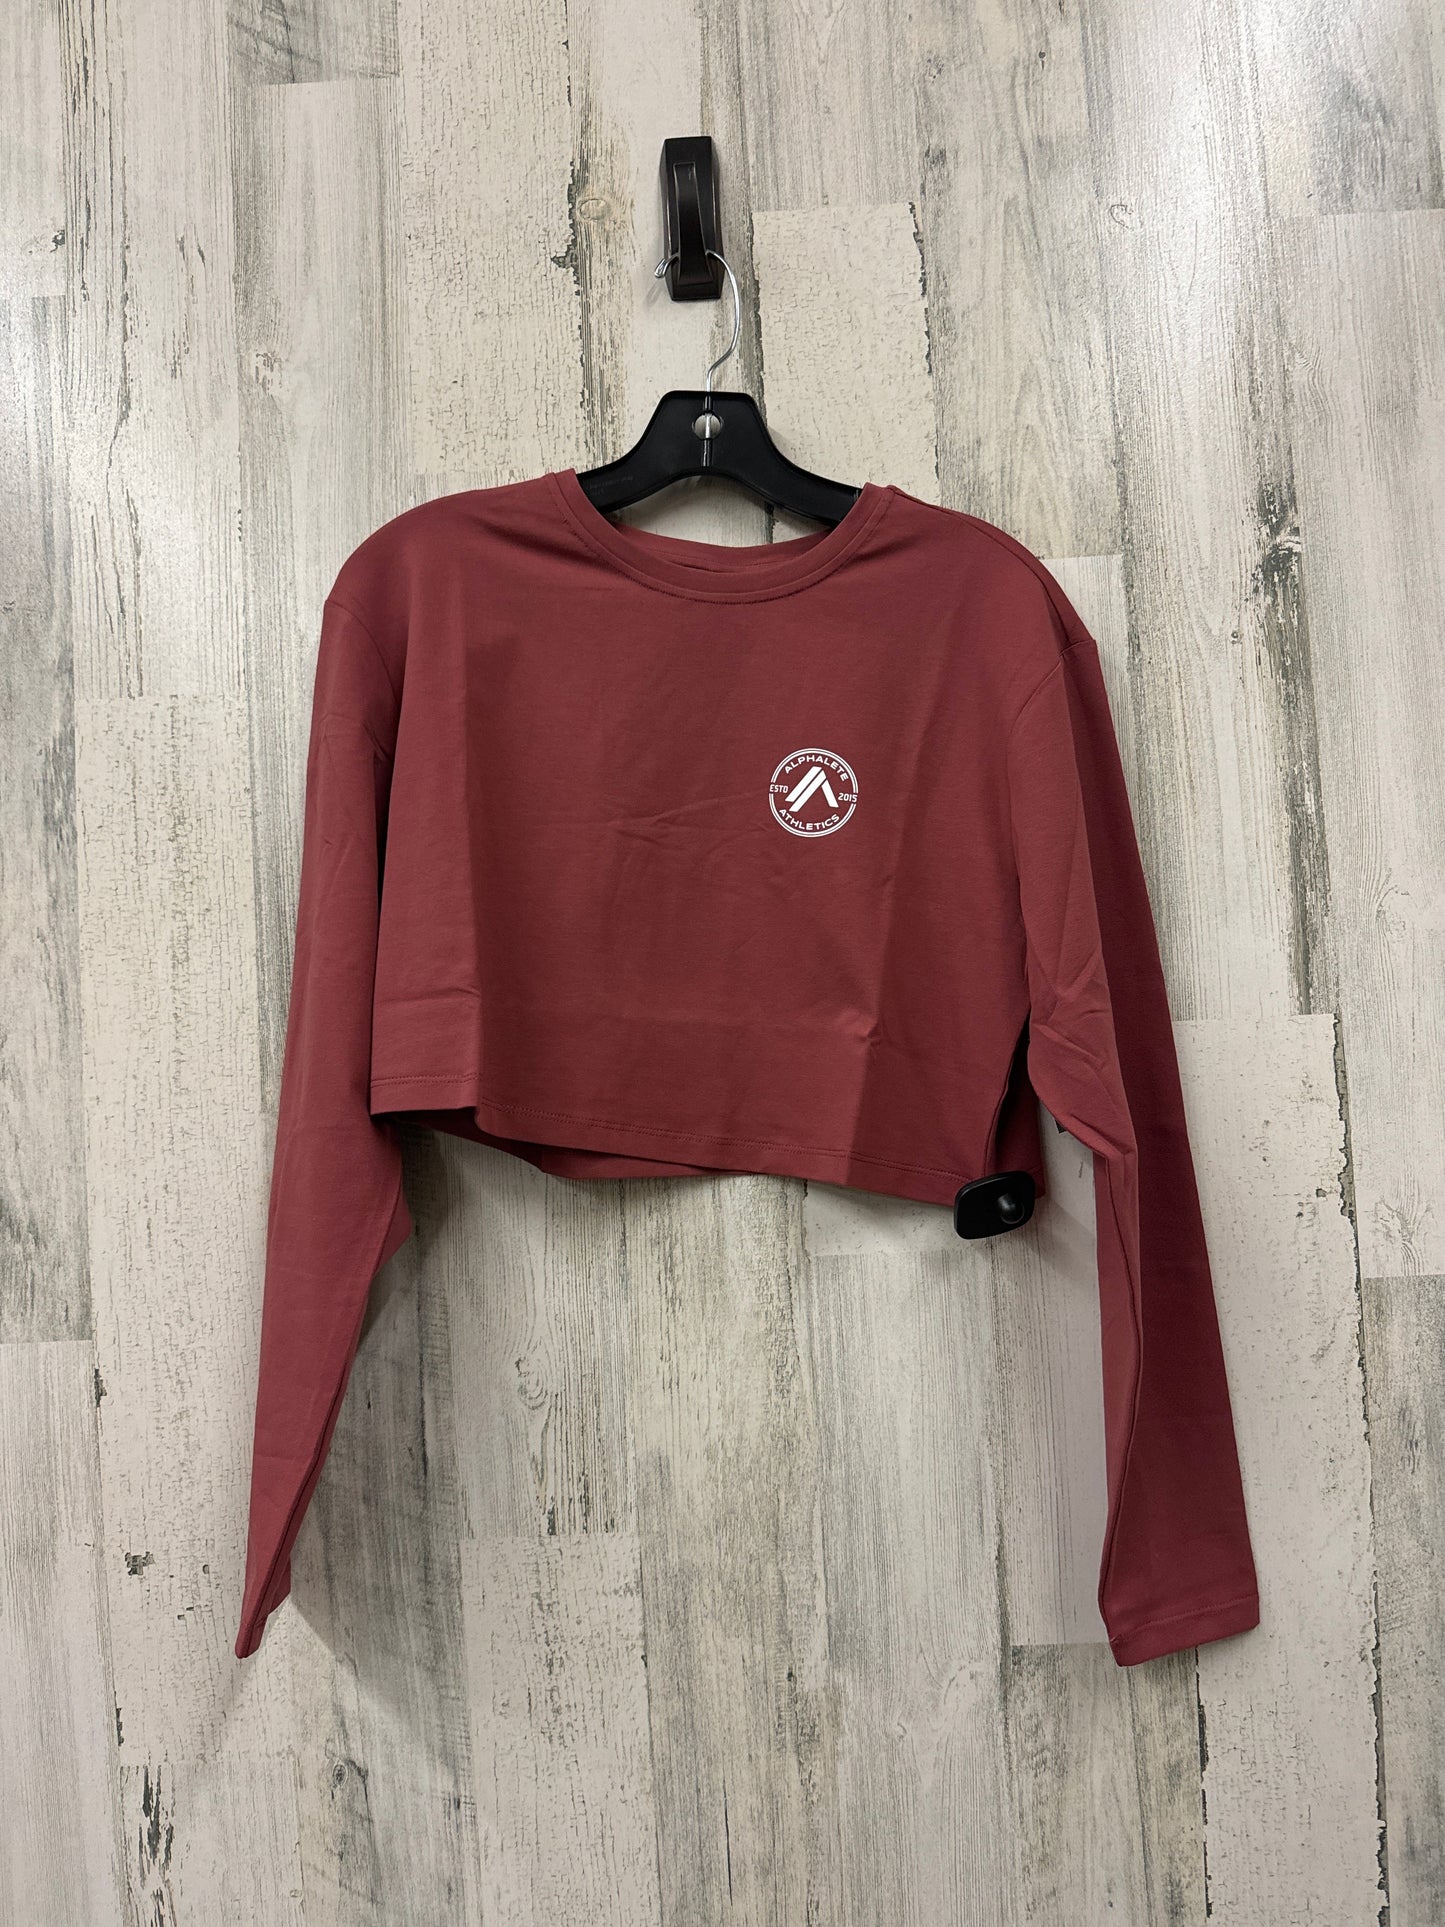 Red Athletic Top Long Sleeve Crewneck Clothes Mentor, Size Xs